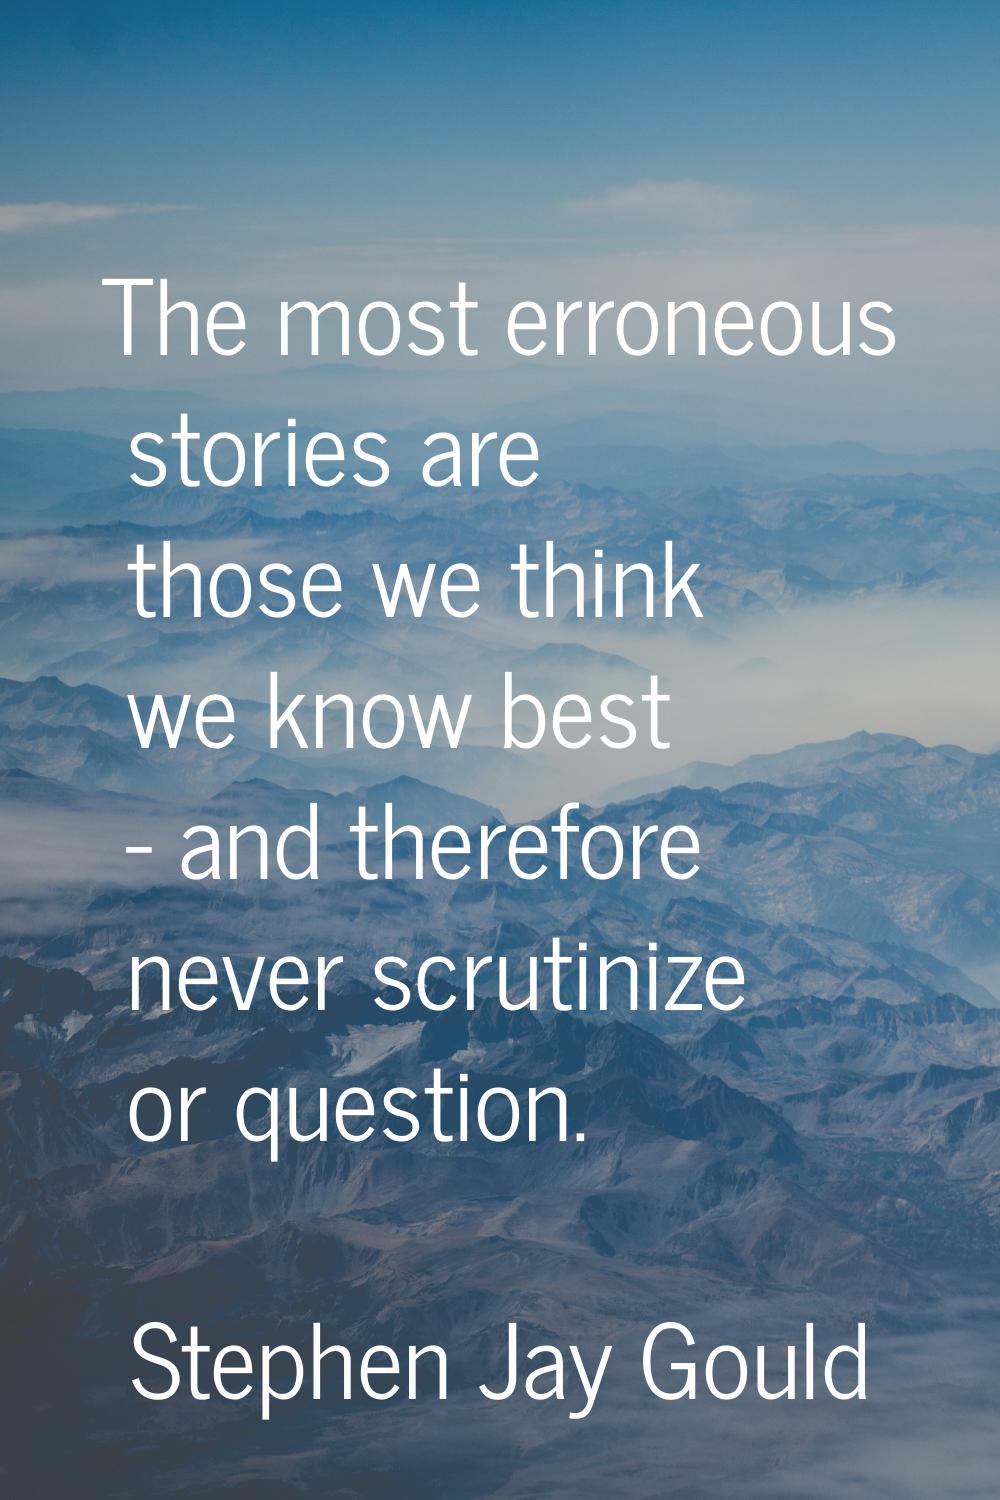 The most erroneous stories are those we think we know best - and therefore never scrutinize or ques